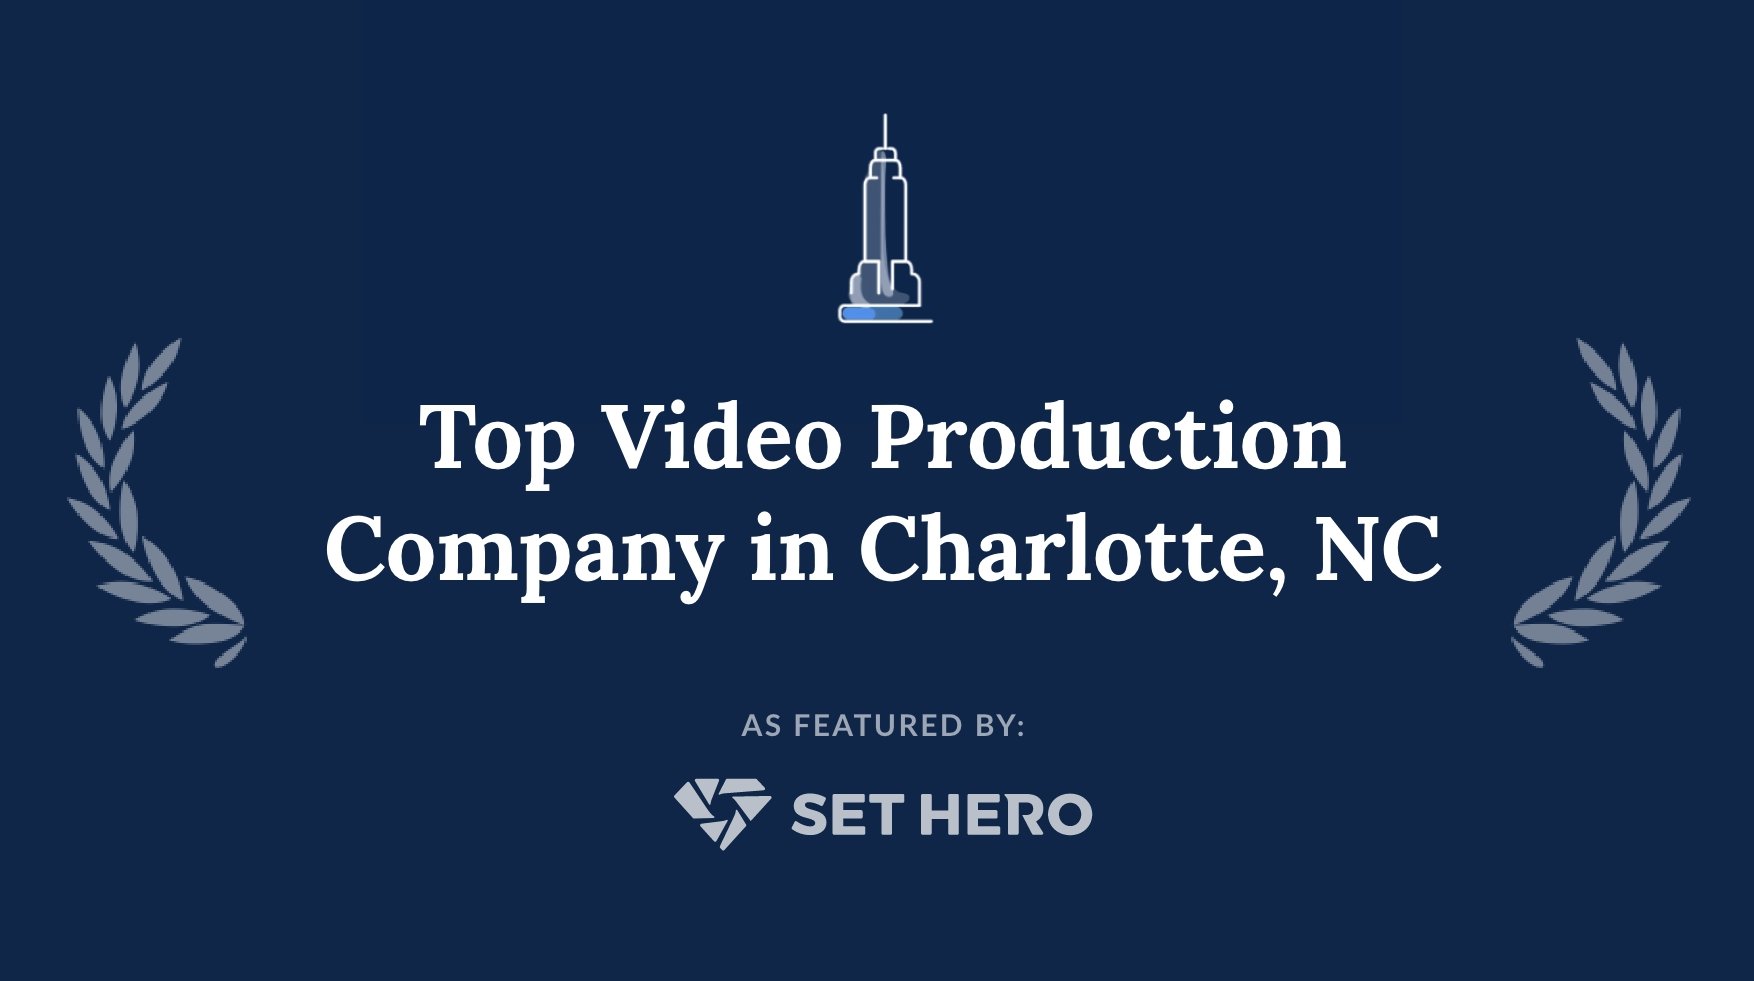 La Storia Featured as Top Production Company in Charlotte NC